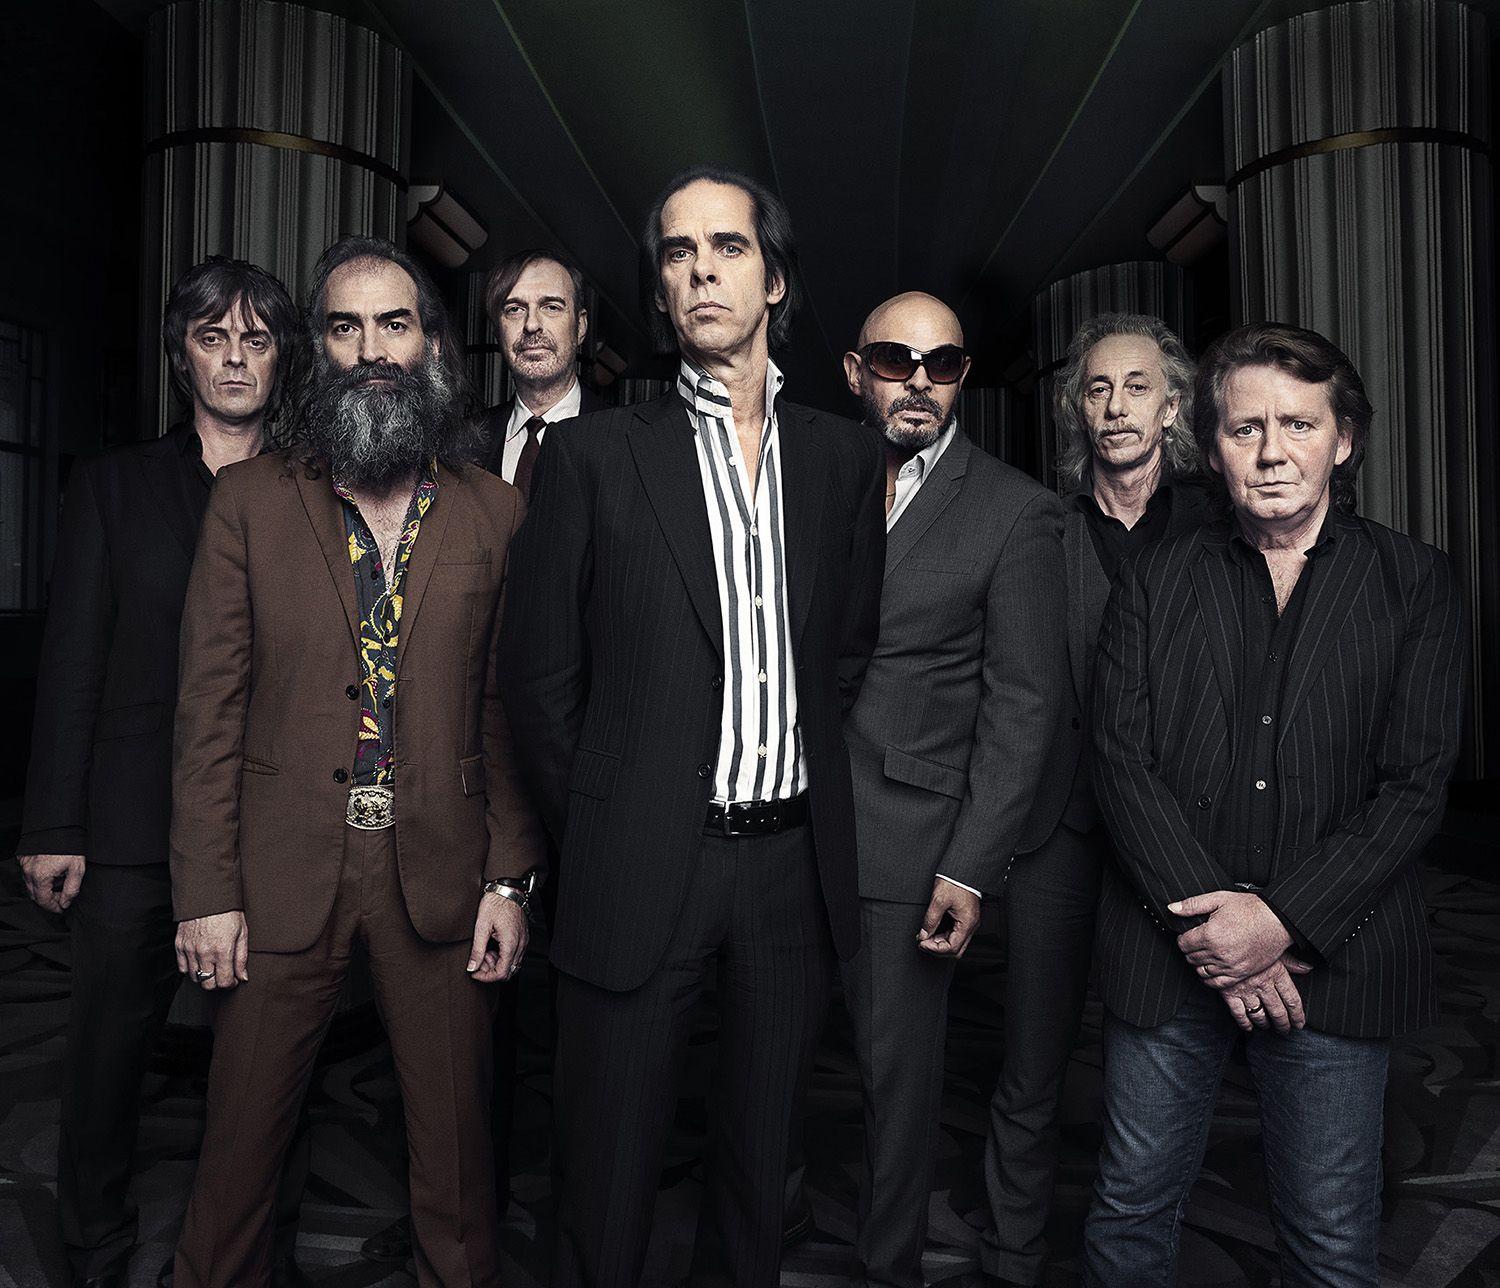 Most viewed Nick Cave And The Bad Seeds wallpaperK Wallpaper